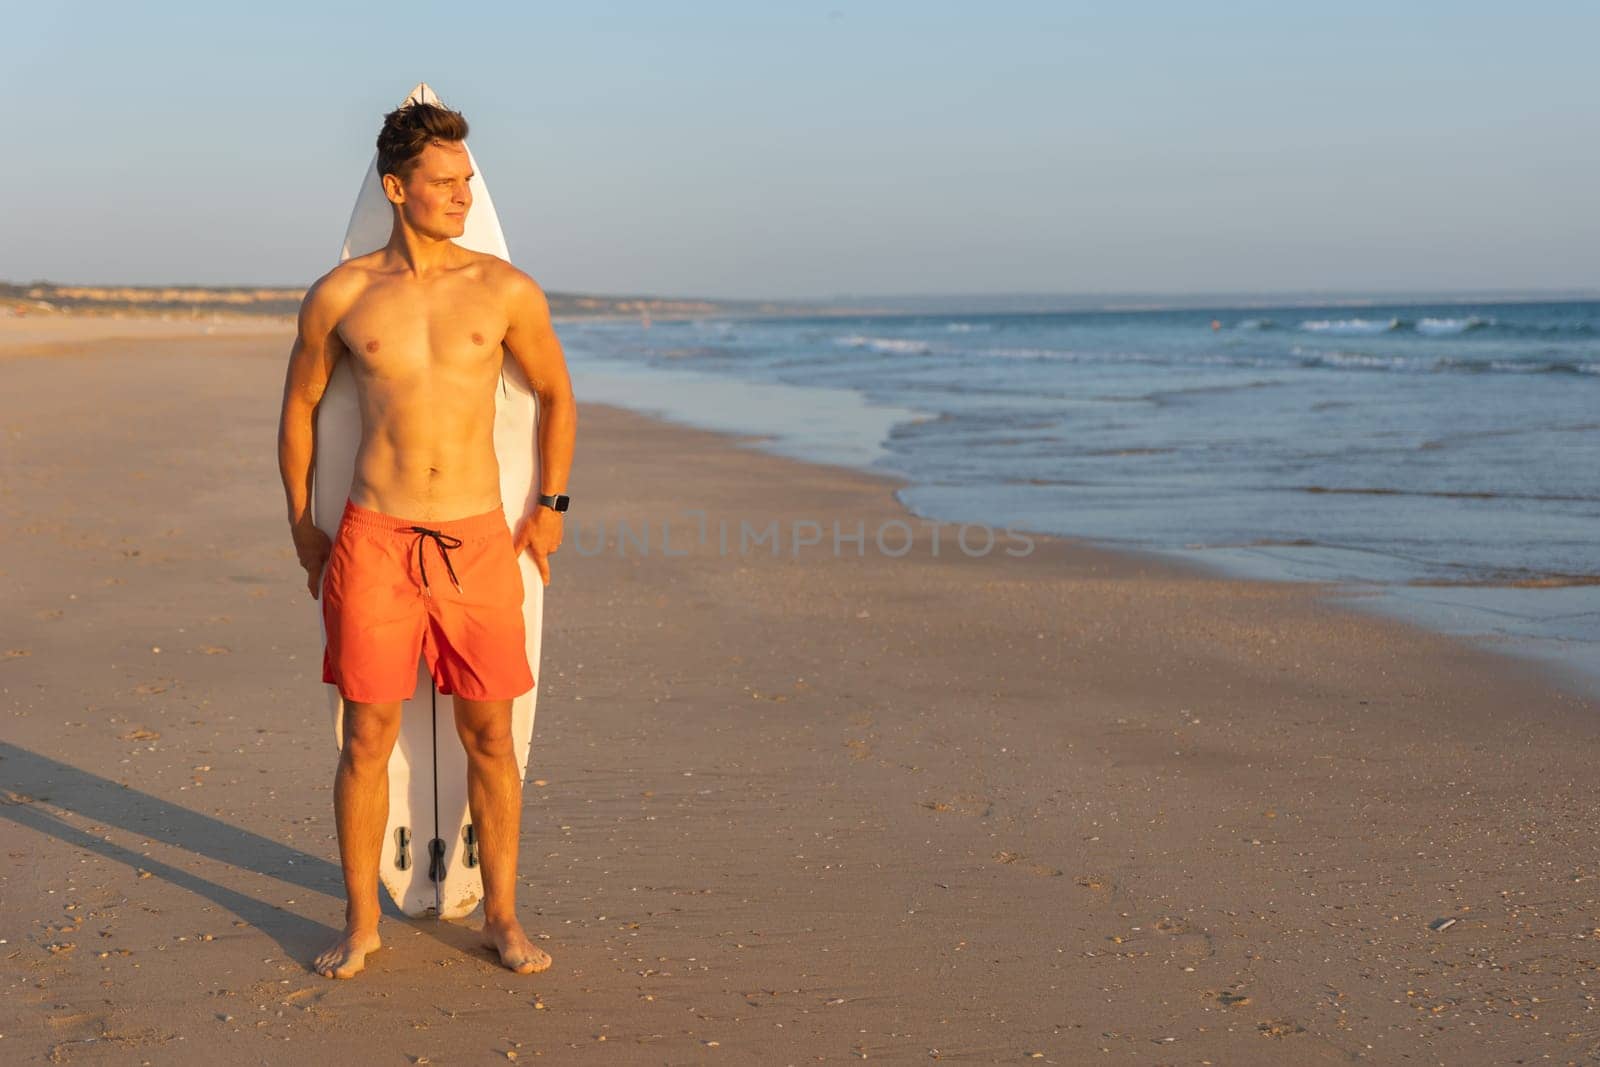 An attractive man with nice athletic body standing on the shore with a surfboard behind his back. Mid shot